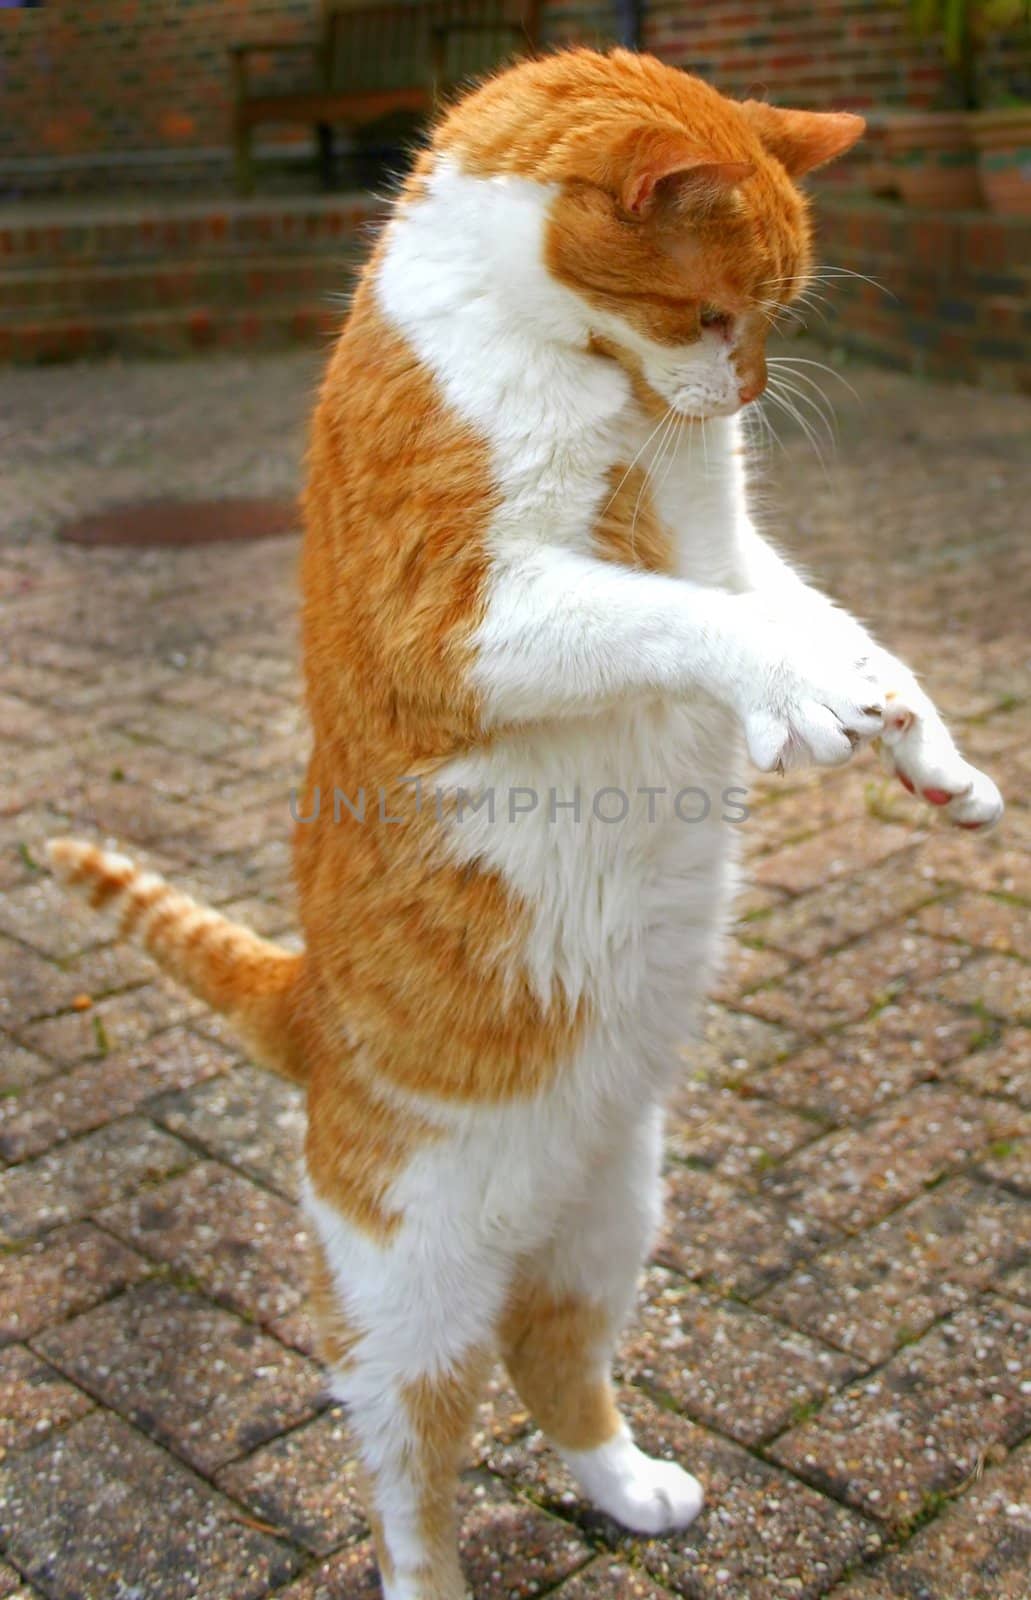 A Cat standing up on two legs